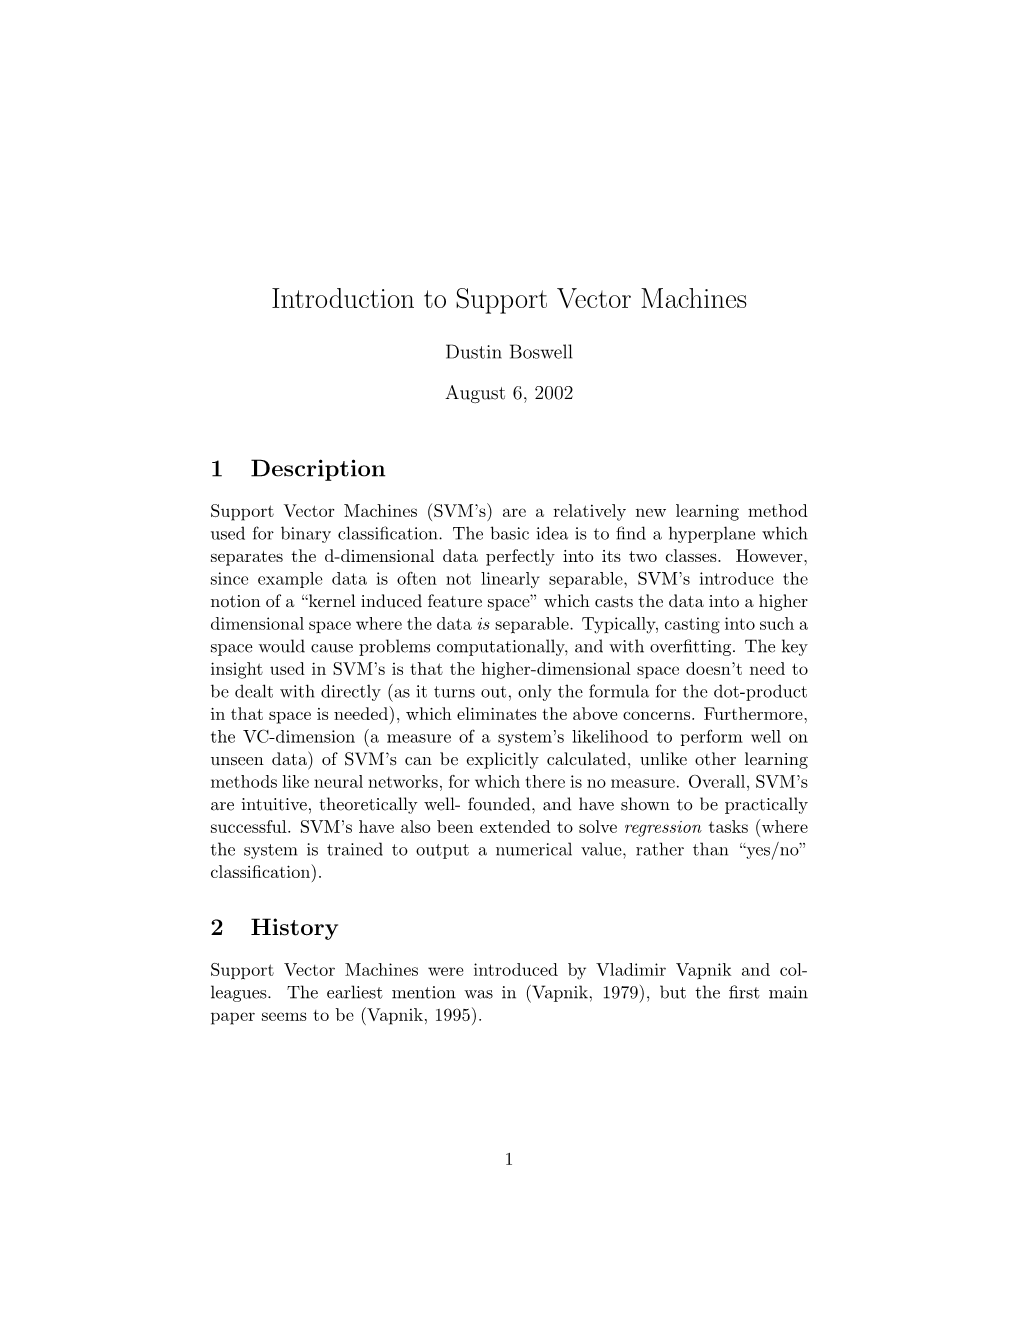 Introduction to Support Vector Machines